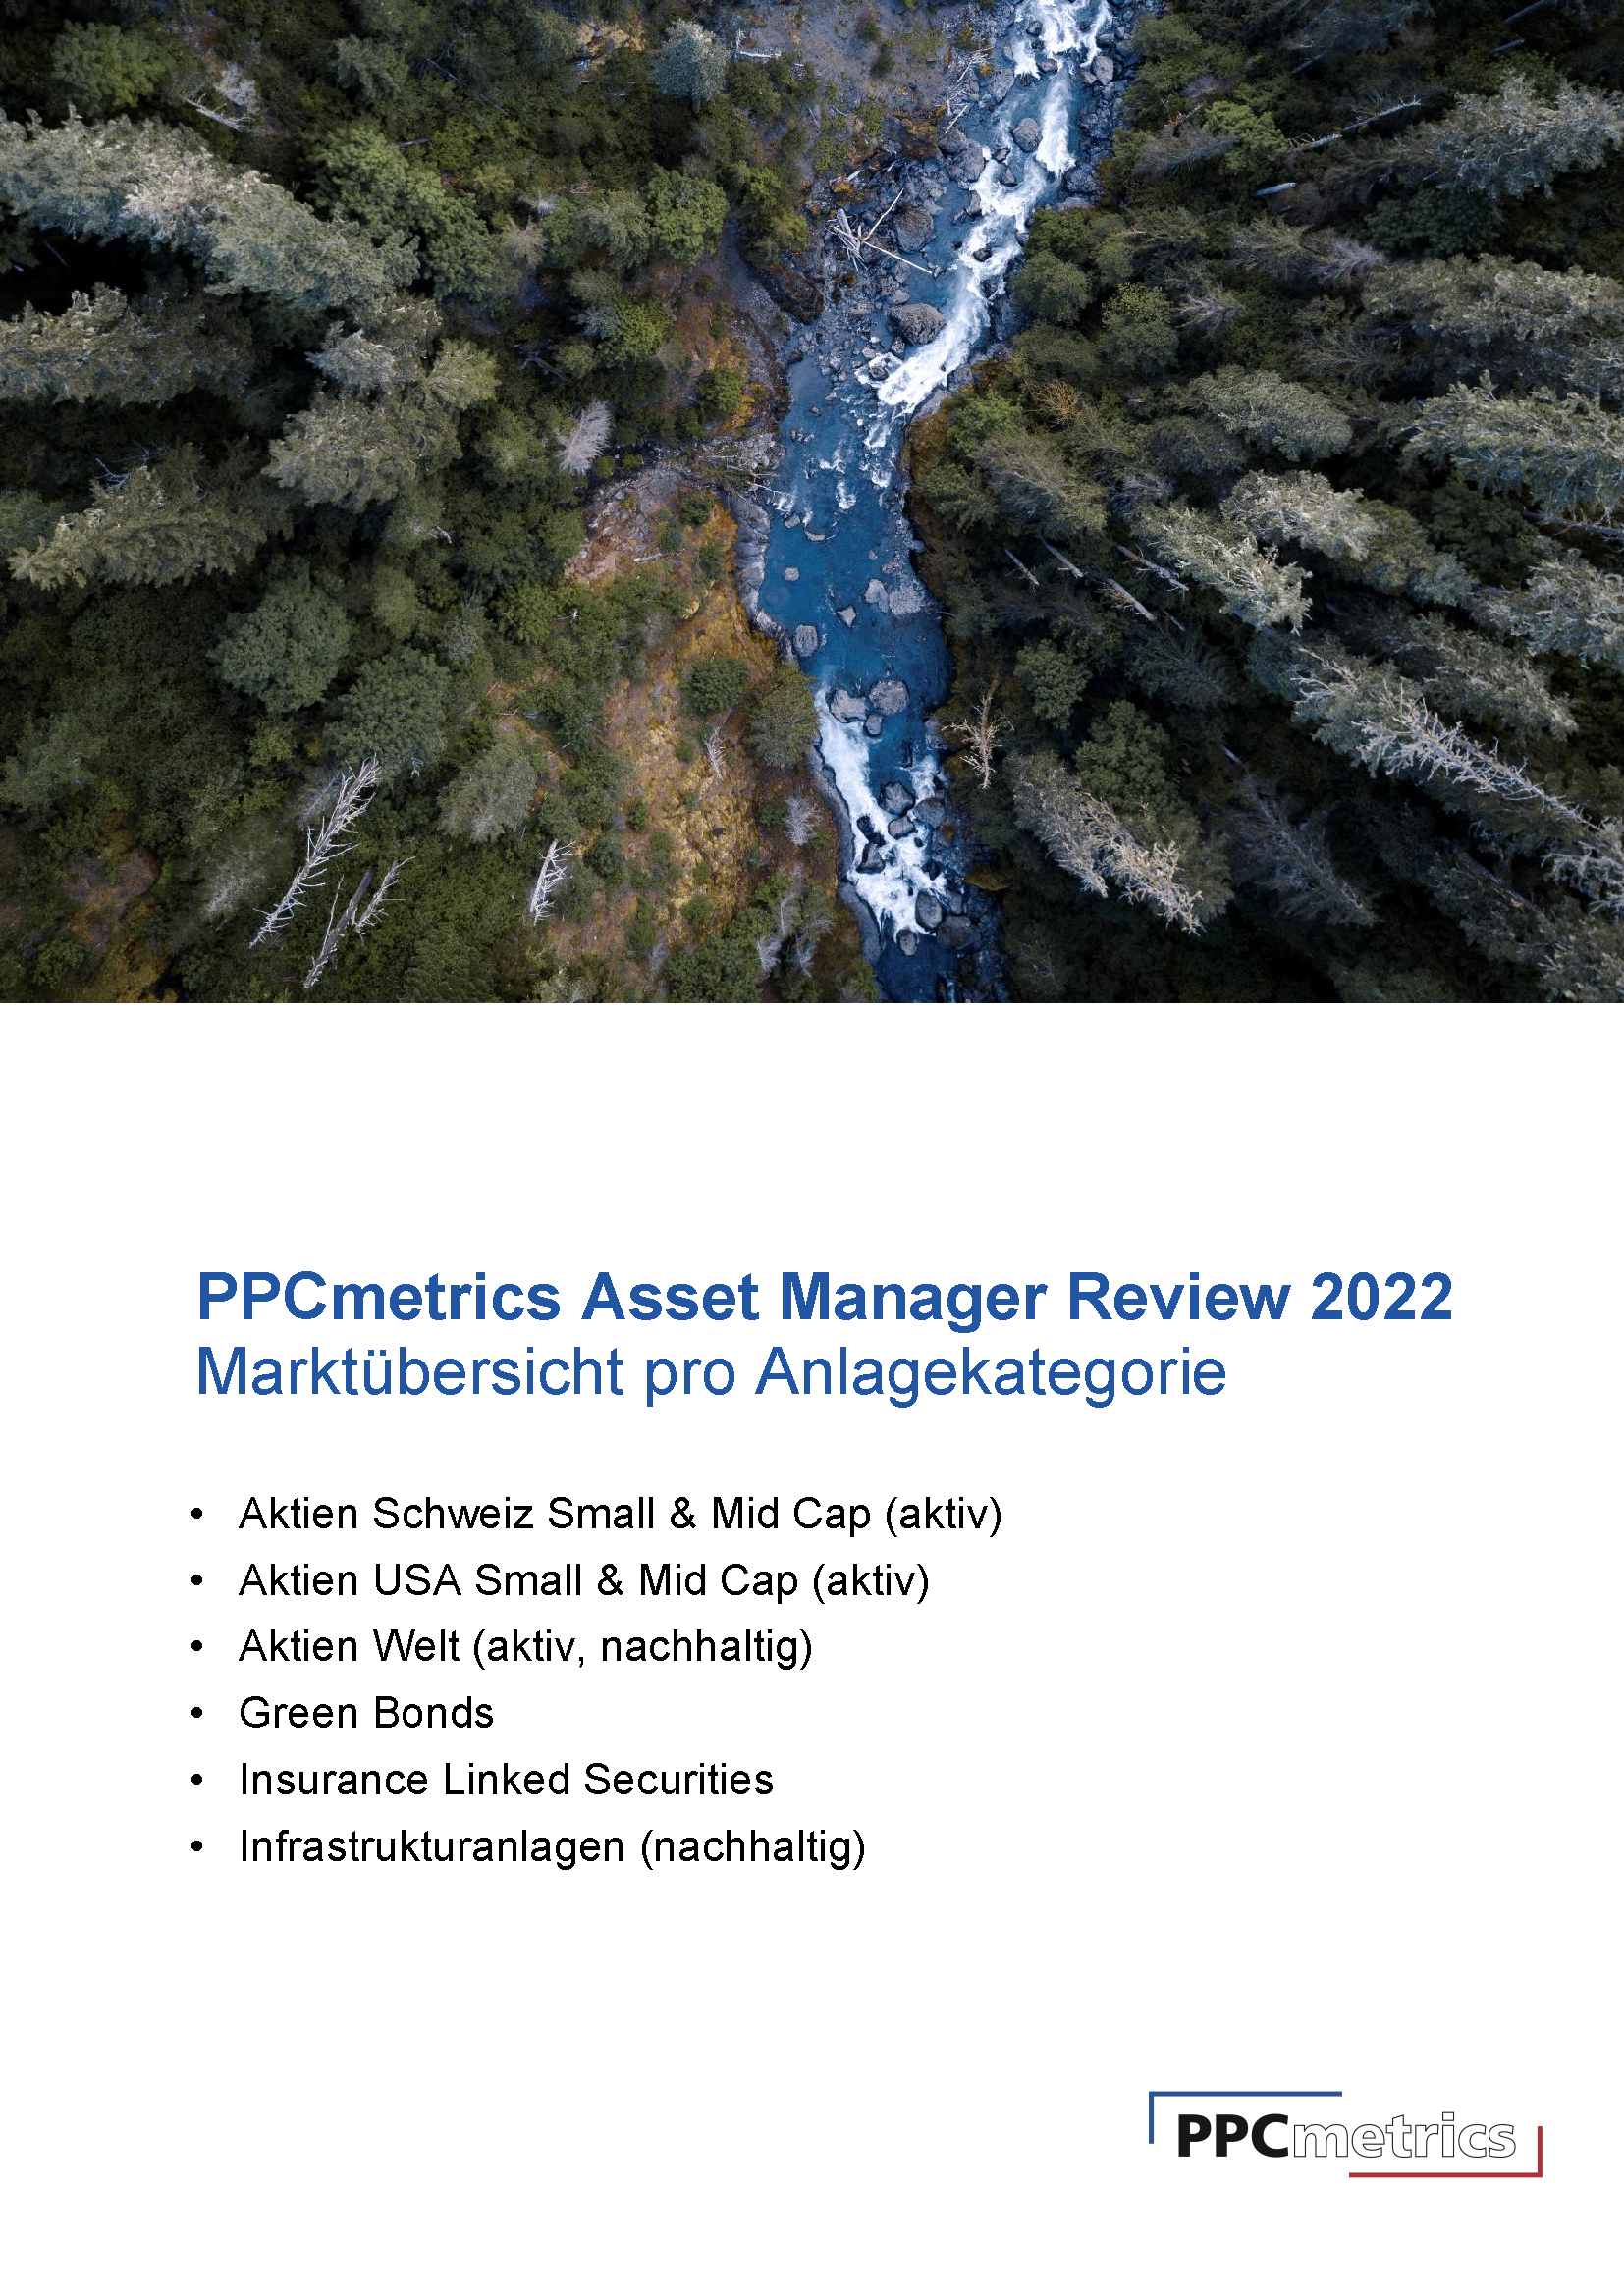 2022-08_PPCmetrics Asset Manager Review 2022_Seite_02.png